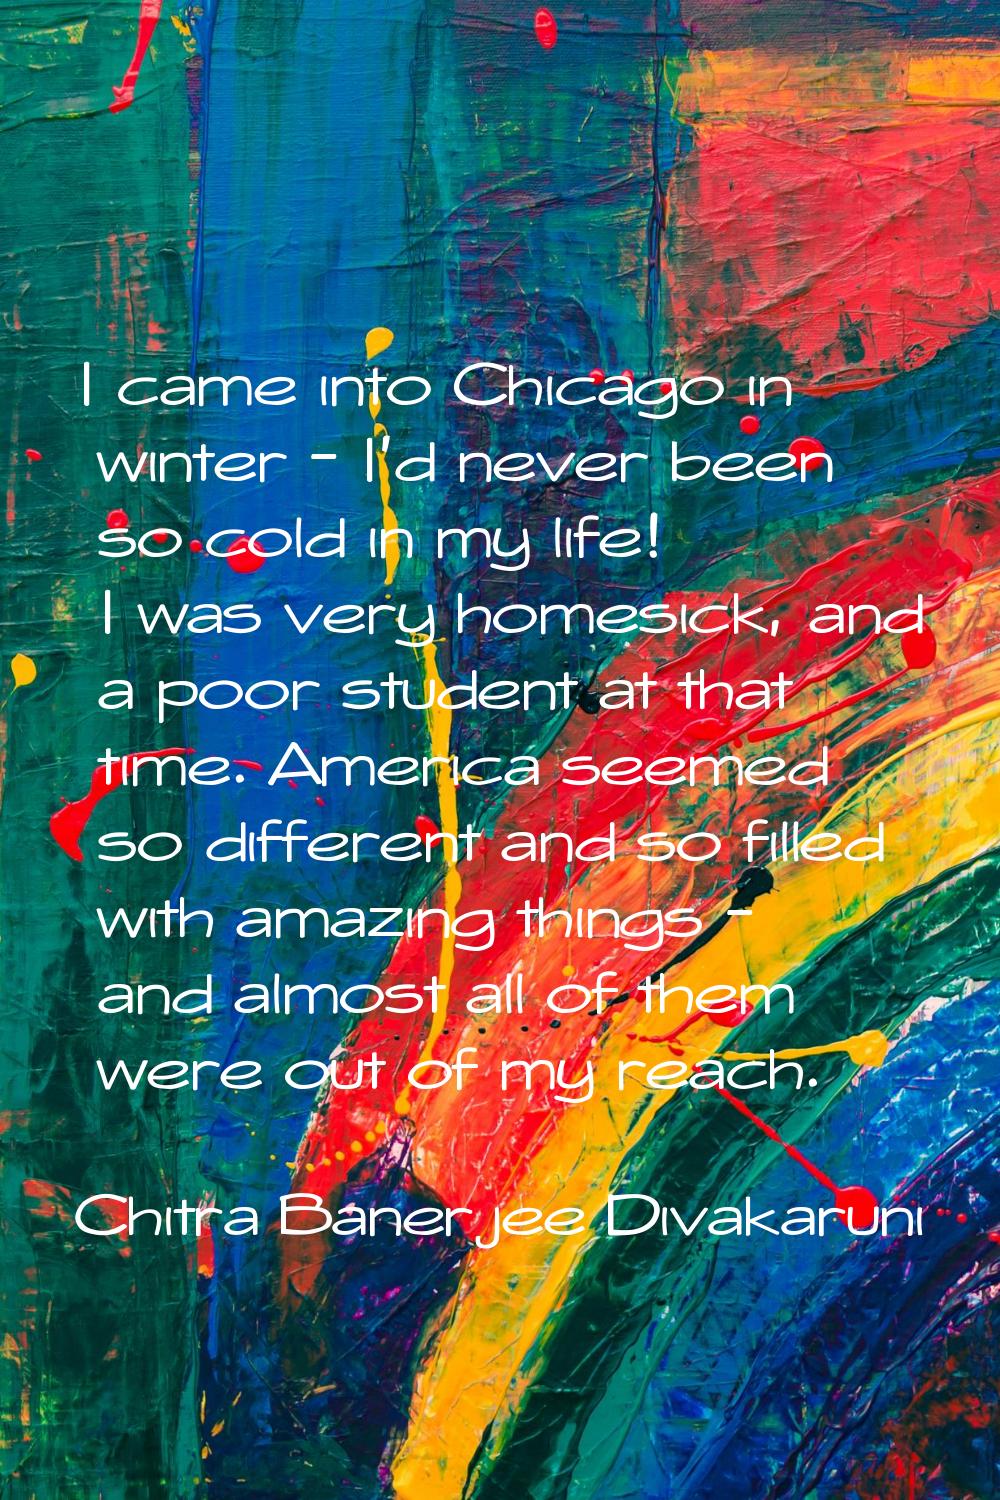 I came into Chicago in winter - I'd never been so cold in my life! I was very homesick, and a poor 